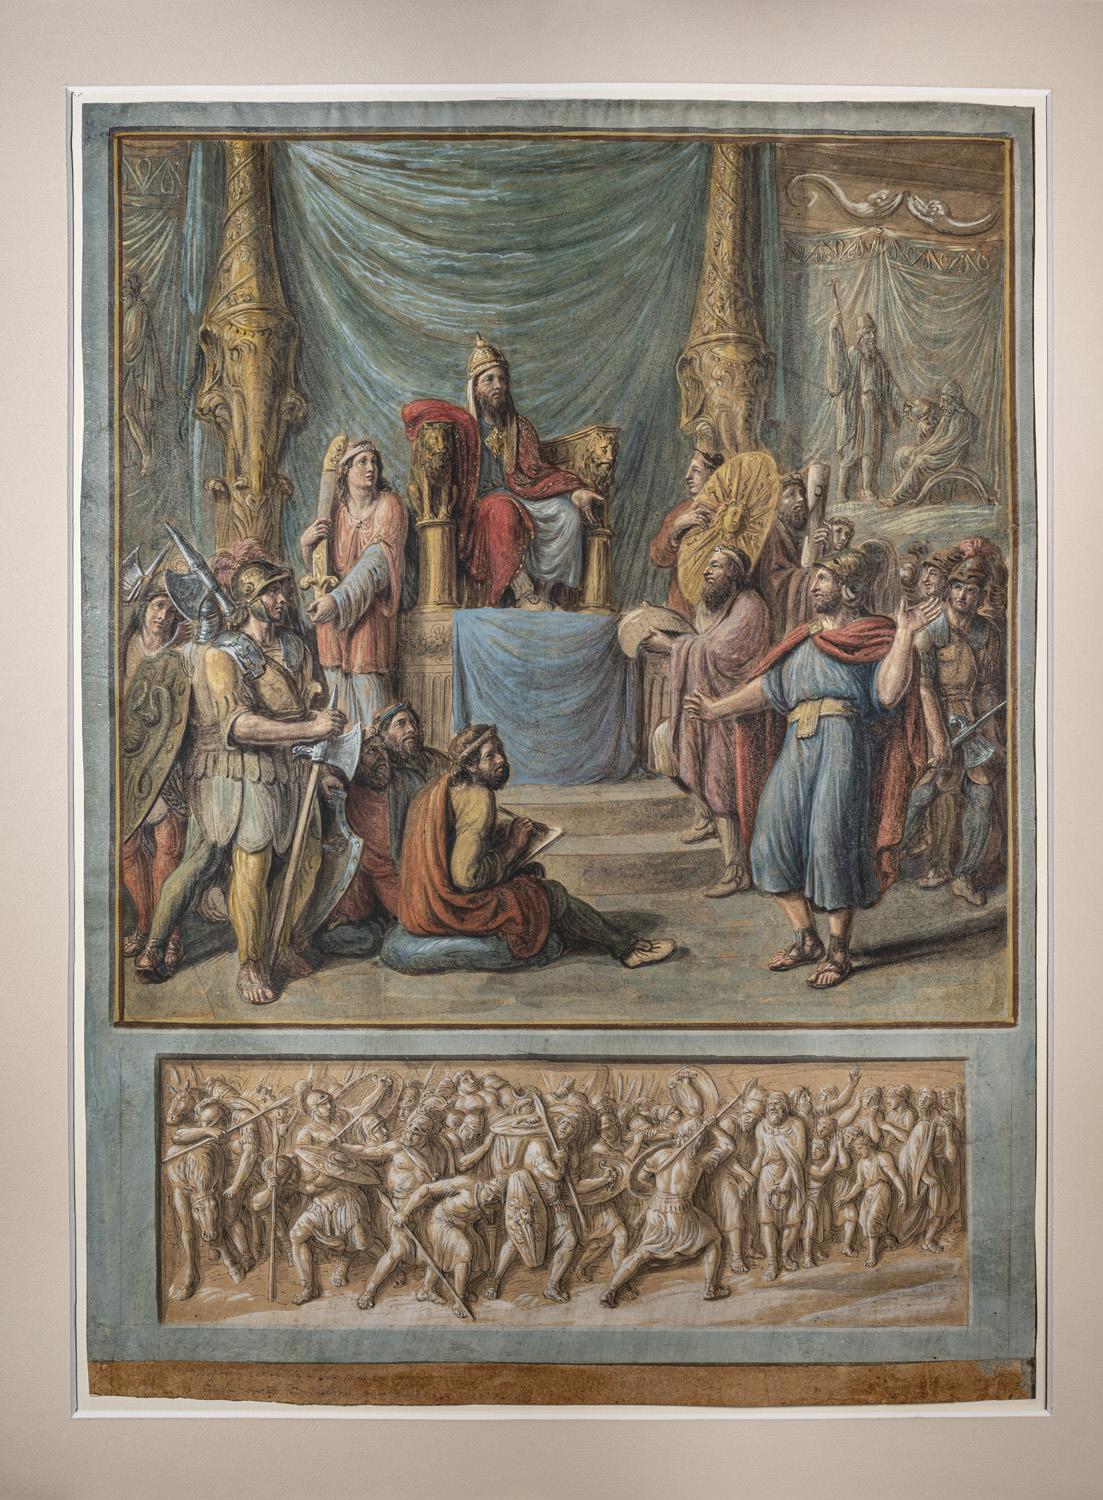 Measurements with frame: 87 x 69 cm
The Ademollian tempera, which can be dated roughly between the first and third decades of the 19th century, illustrates two episodes of war and morality extracted from the life of the leader of Boeotia, the Theban